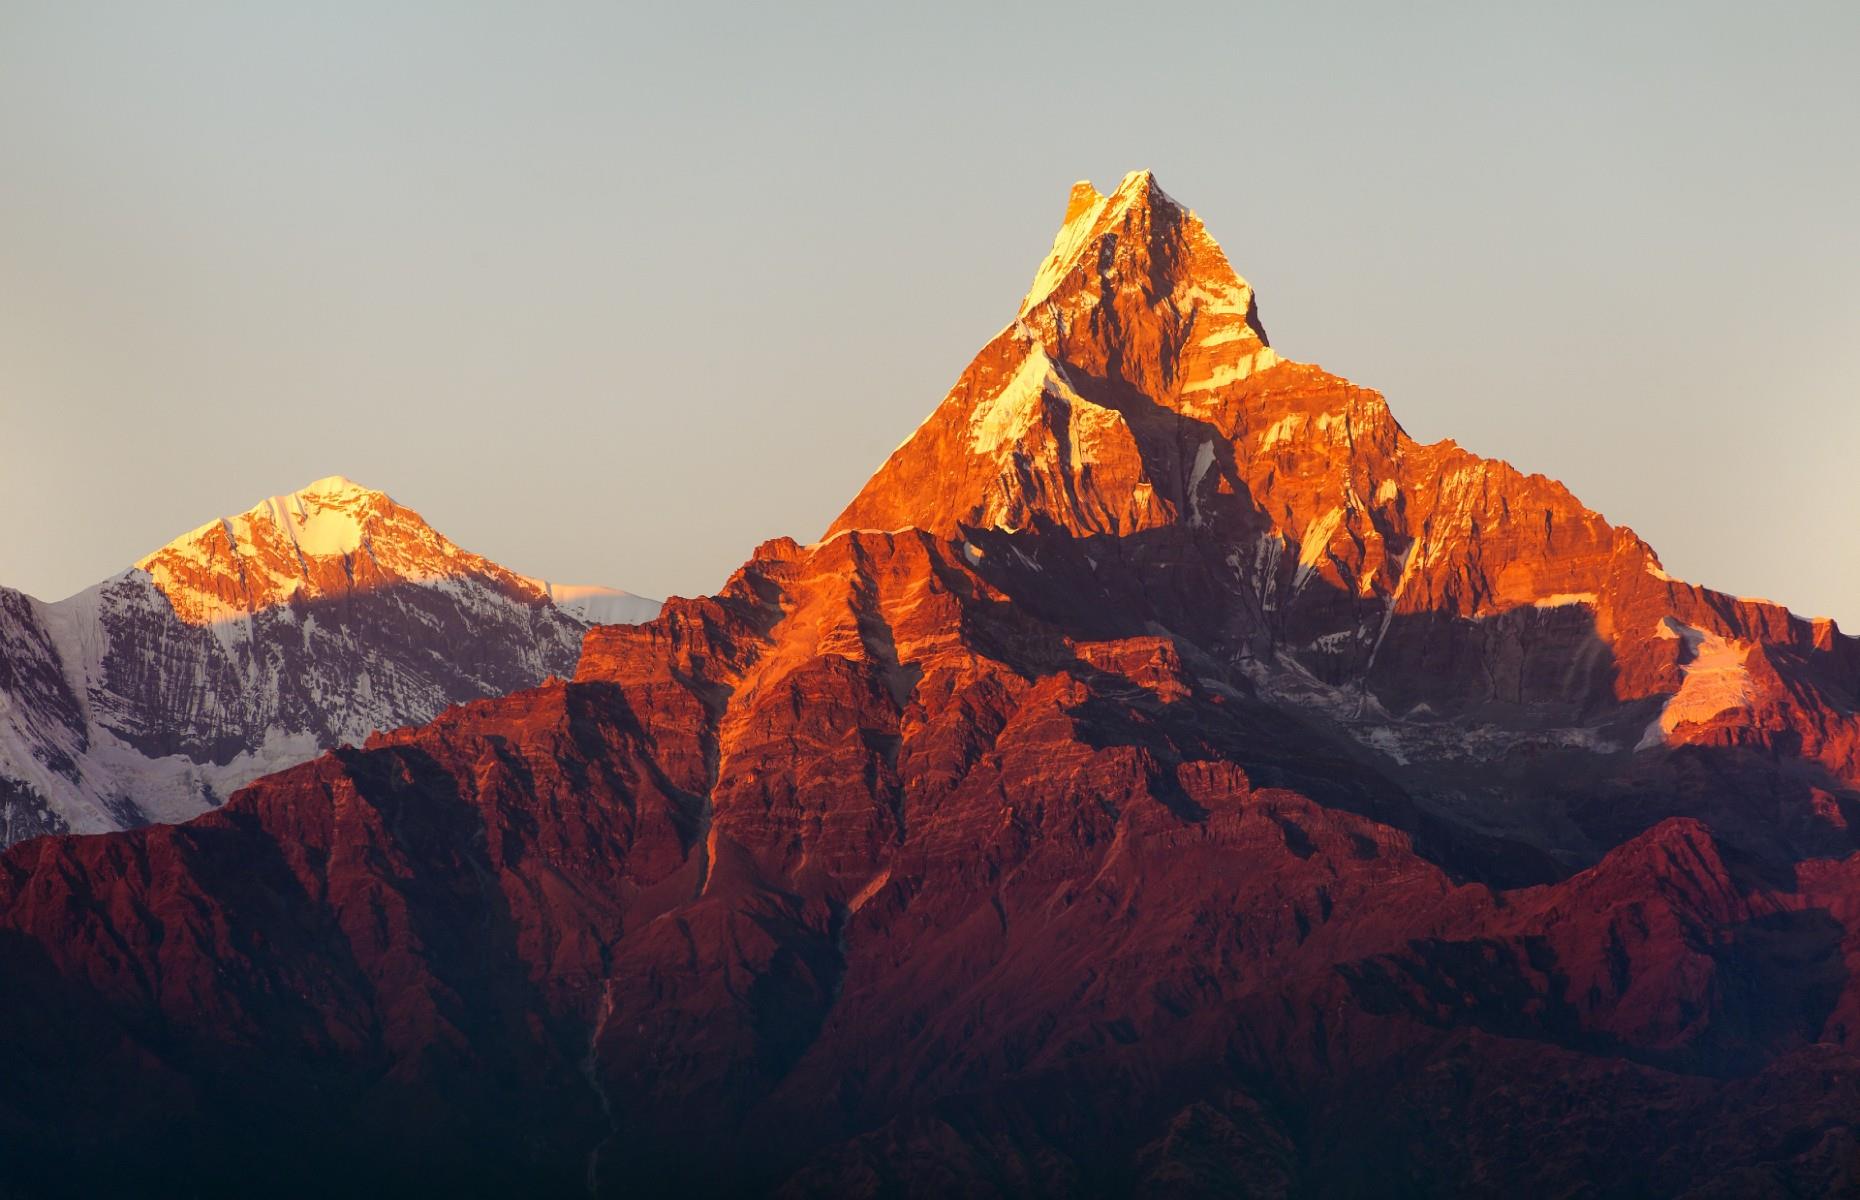 <p>At 22,943 feet (6,993m) tall, it’s not up there with the Himalayas’ big hitters, but Machhapuchhare could be its most elusive peak. Located in north-central Nepal, the stunning, fishtail-shaped mountain has never been summited. That’s due to <a href="https://www.bbc.com/travel/article/20210216-the-himalayan-peak-off-limits-to-climbers">British army officer Jimmy Roberts</a>, who attempted an expedition up Machhapuchhare in 1957, but had to turn back due to bad weather. Bizarrely, Roberts made the request to ban all climbing on the mountain and the Nepali government obliged. It’s also regarded as sacred by the Gurung people who live in the village of Chomrong nearby.</p>